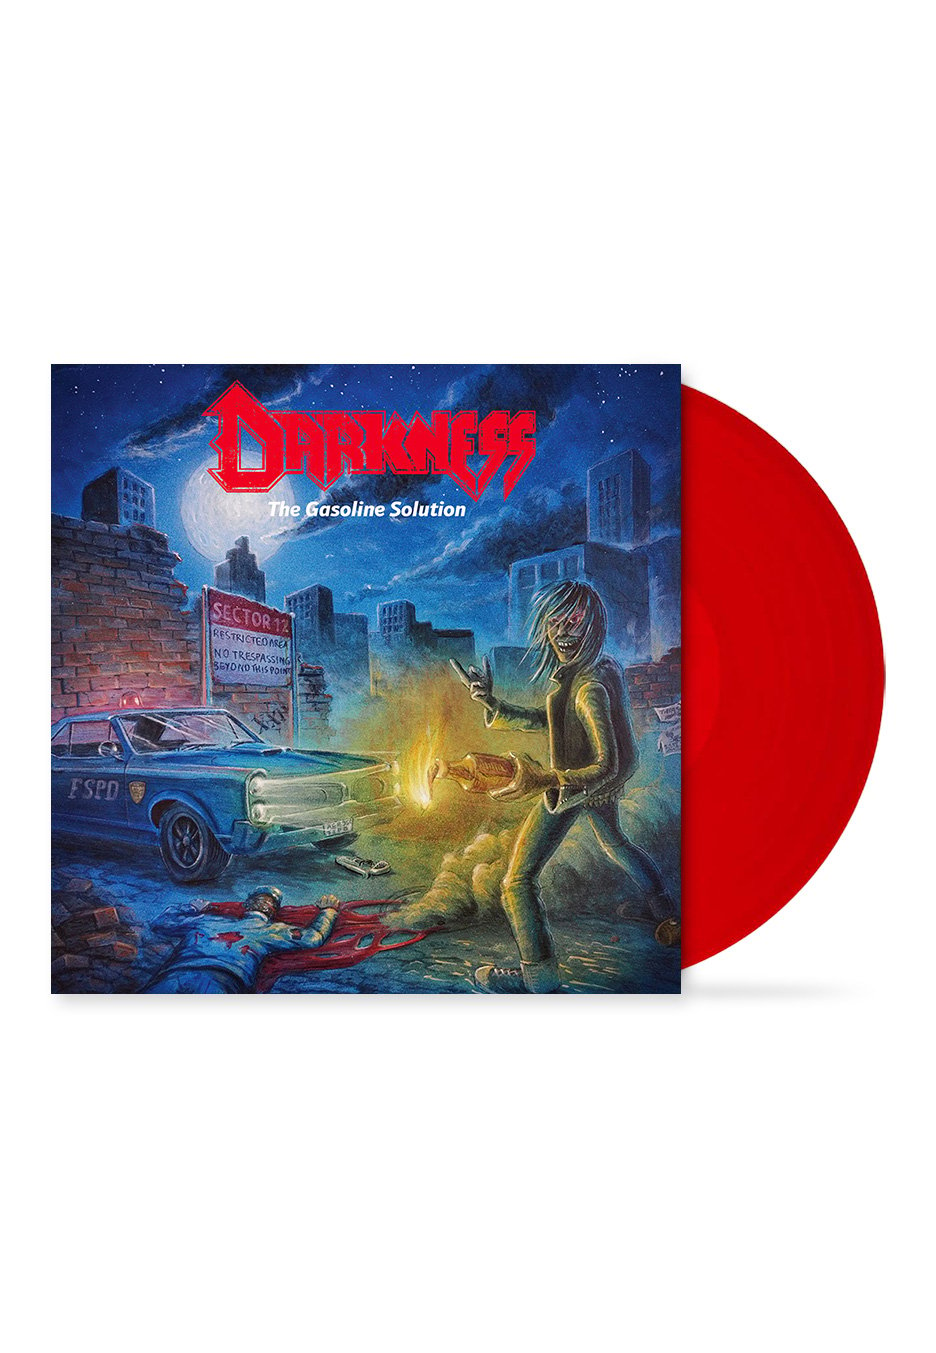 Darkness - The Gasoline Solution Ltd. Red - Colored Vinyl